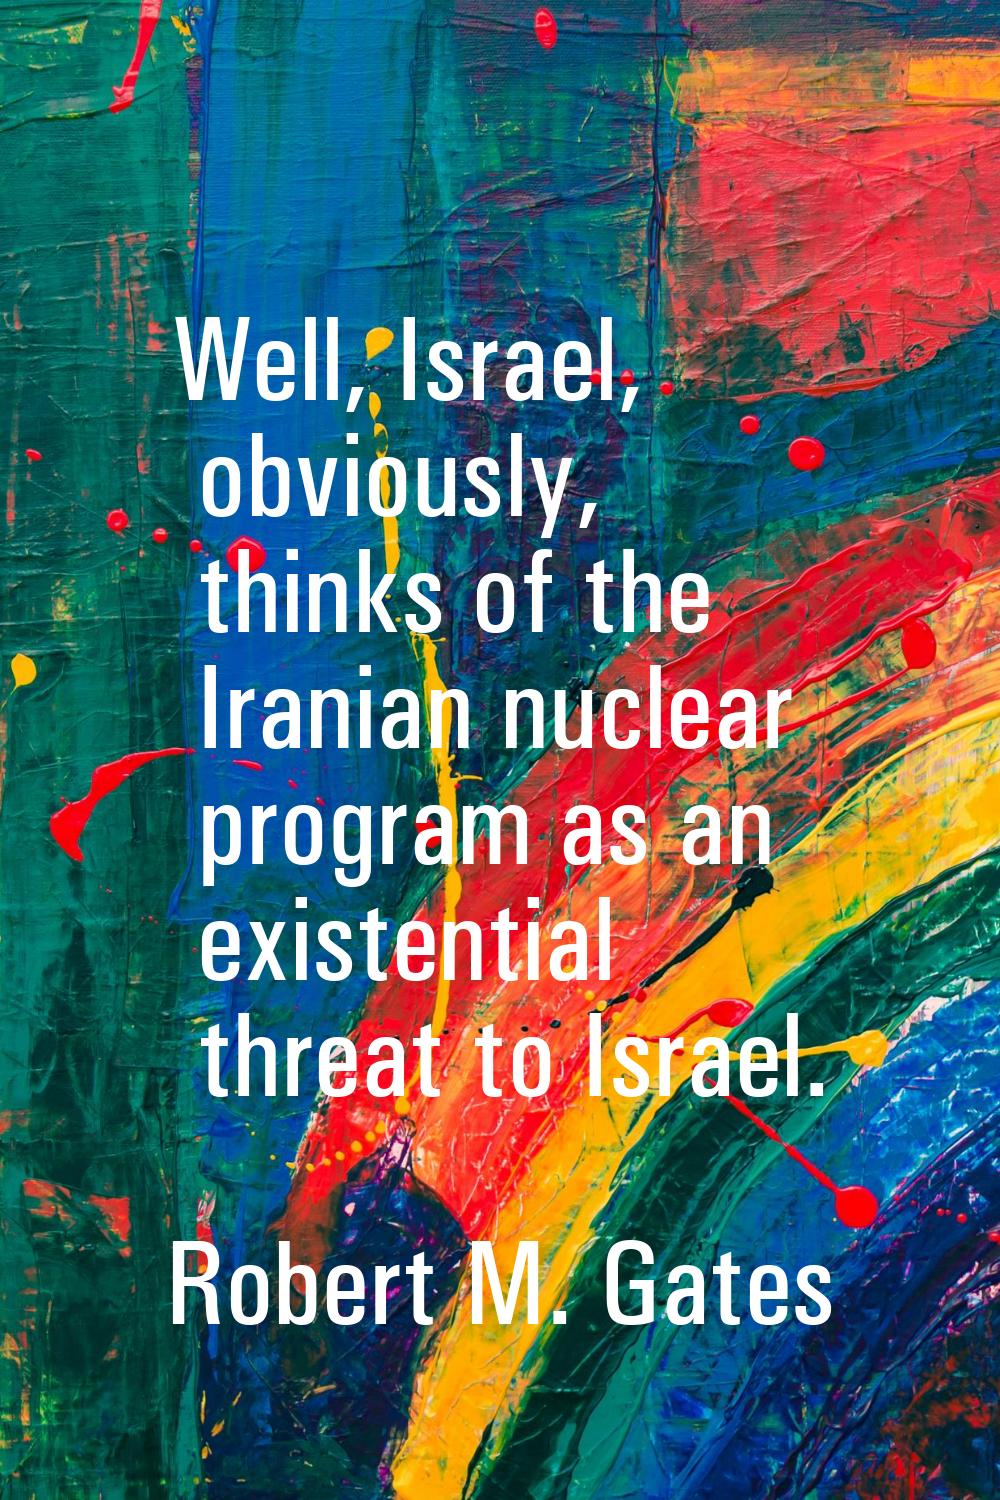 Well, Israel, obviously, thinks of the Iranian nuclear program as an existential threat to Israel.